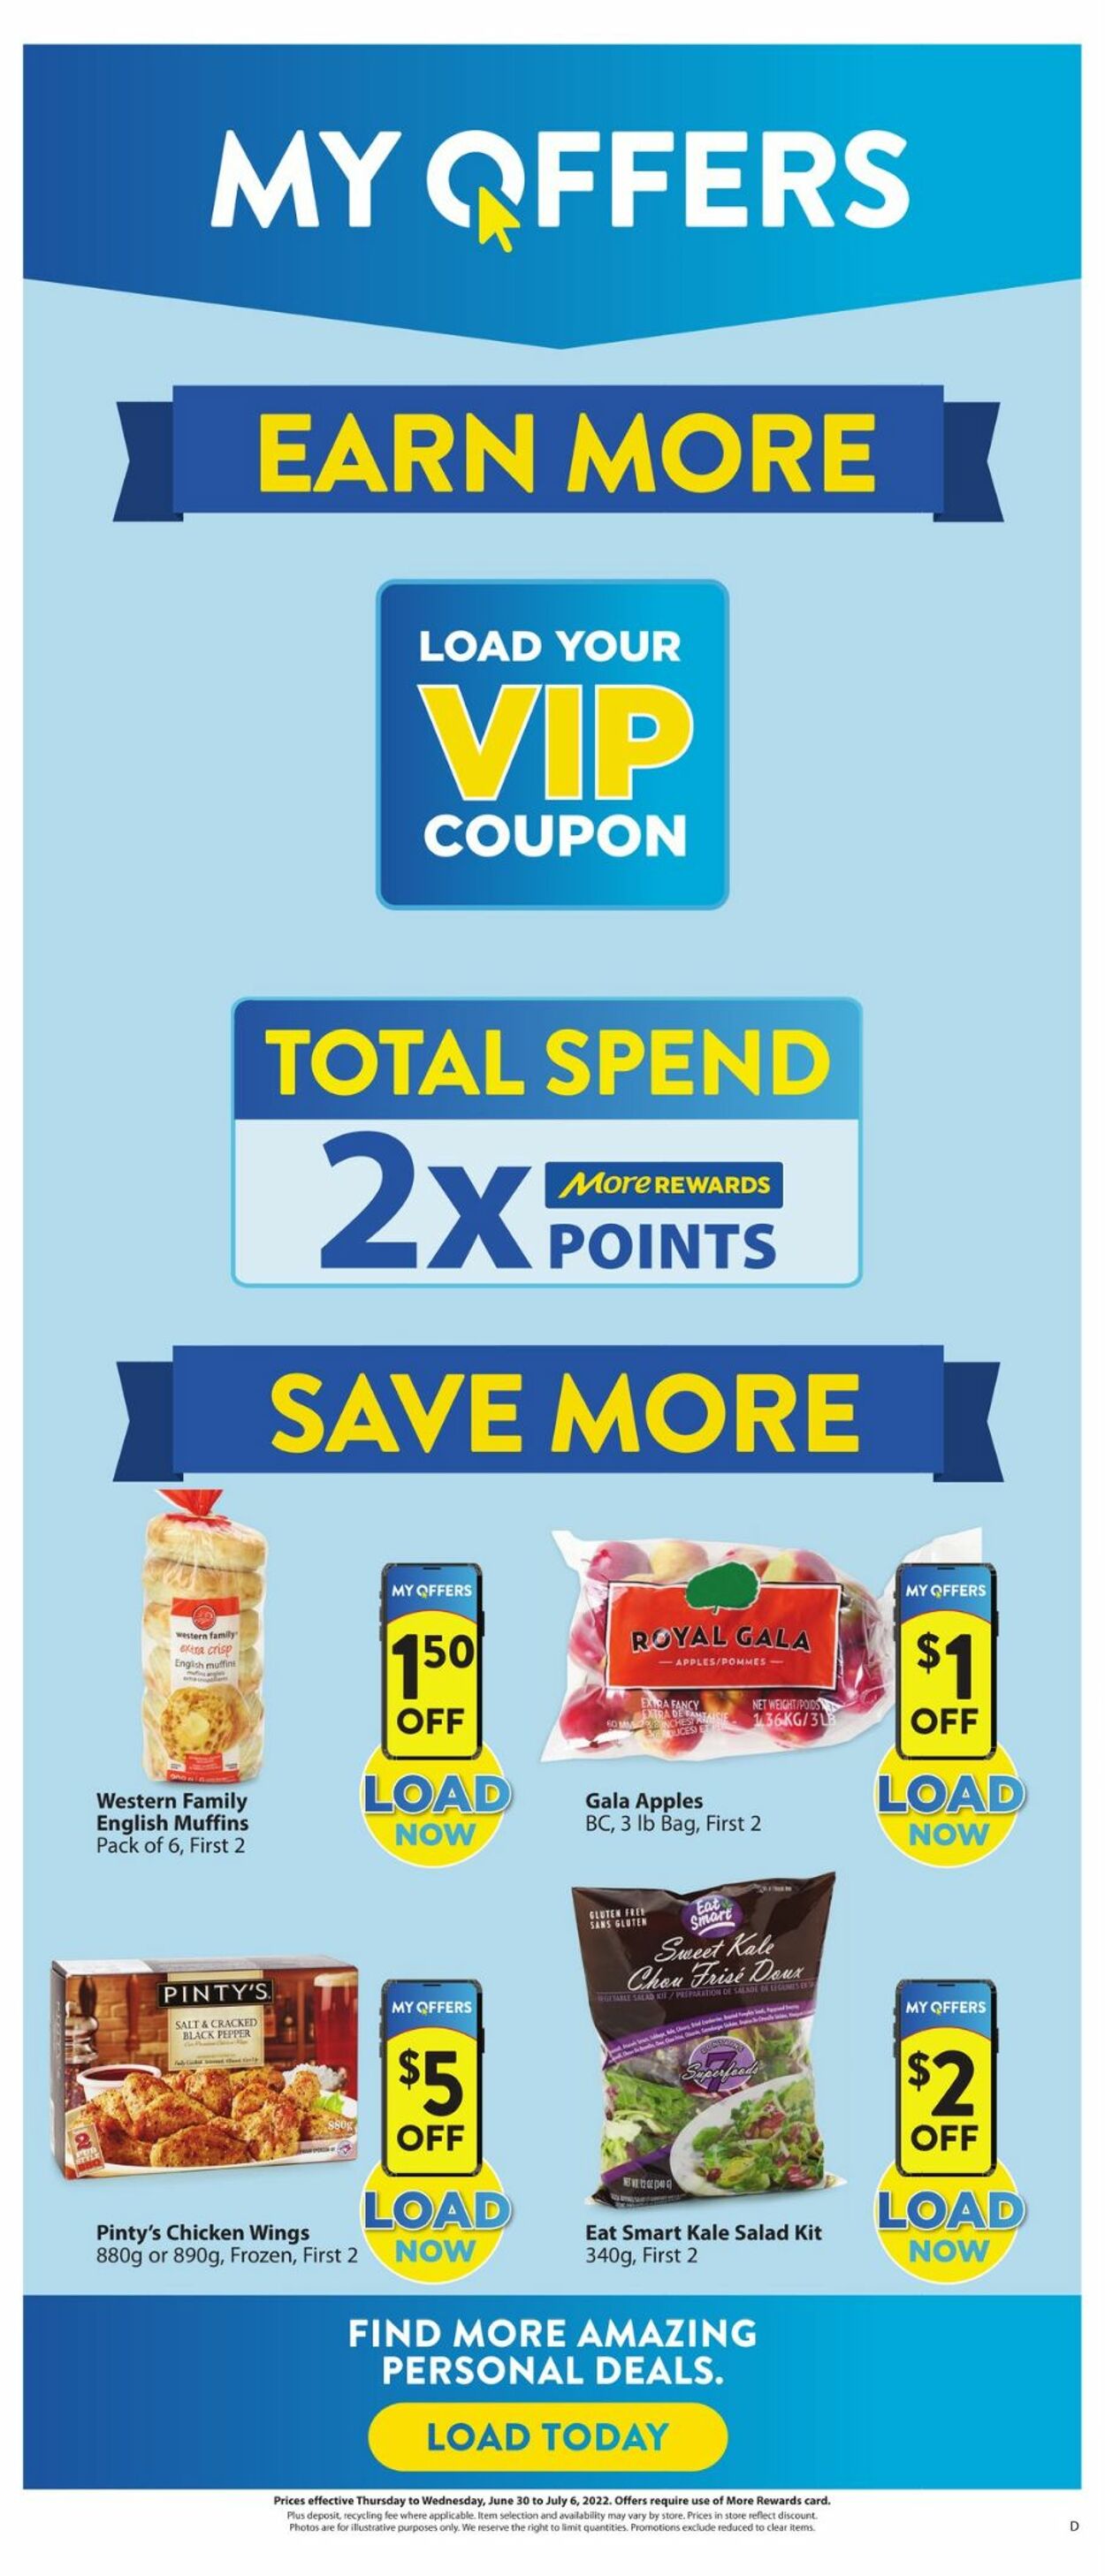 Circulaire Save-On-Foods 30.06.2022 - 06.07.2022